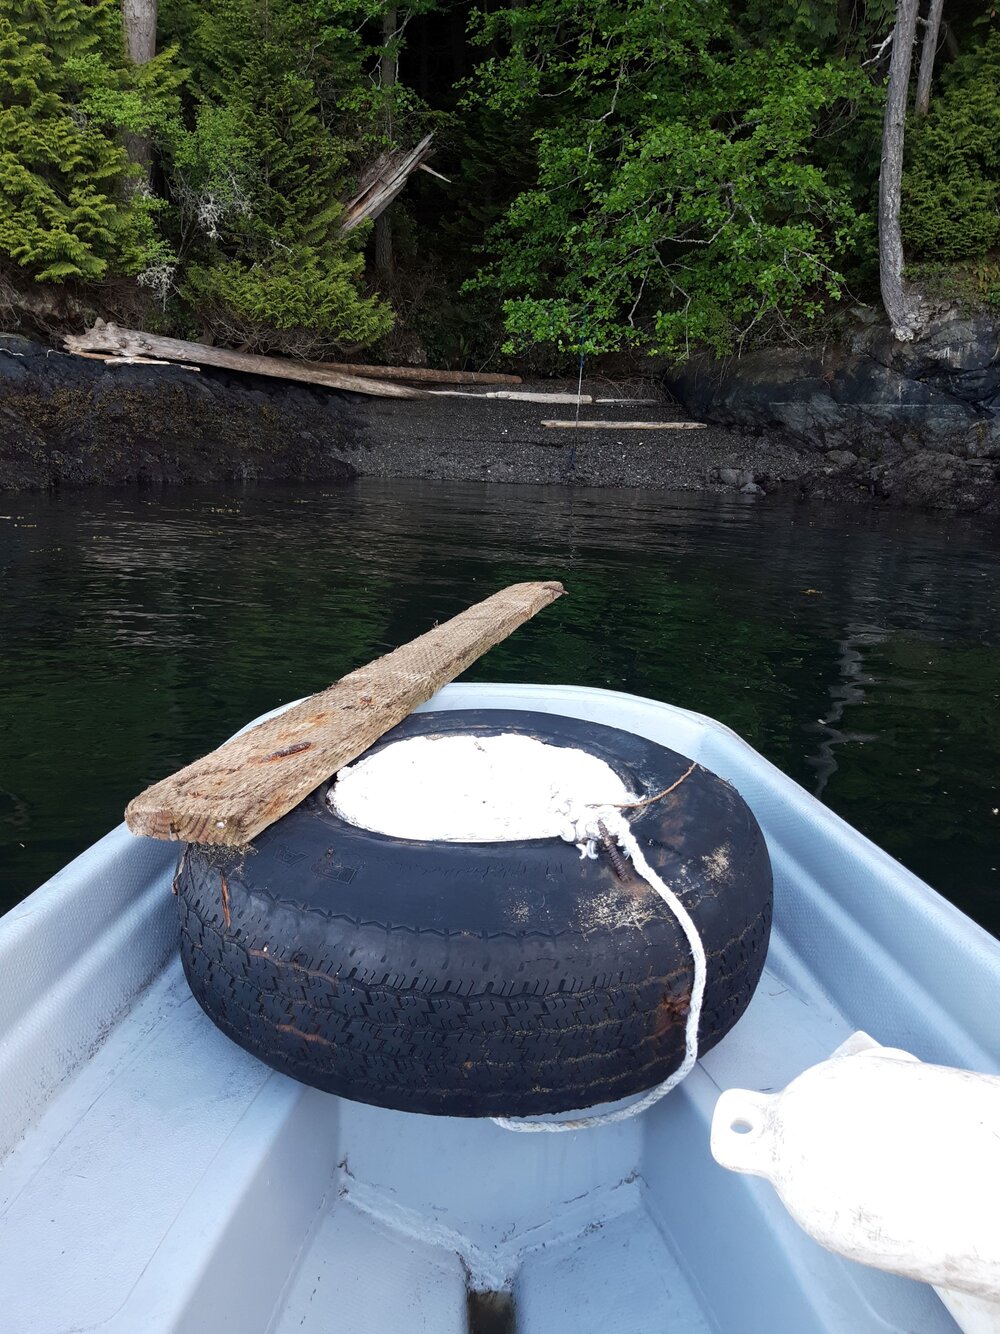 You never know what you’ll find in the water, including this old tire.